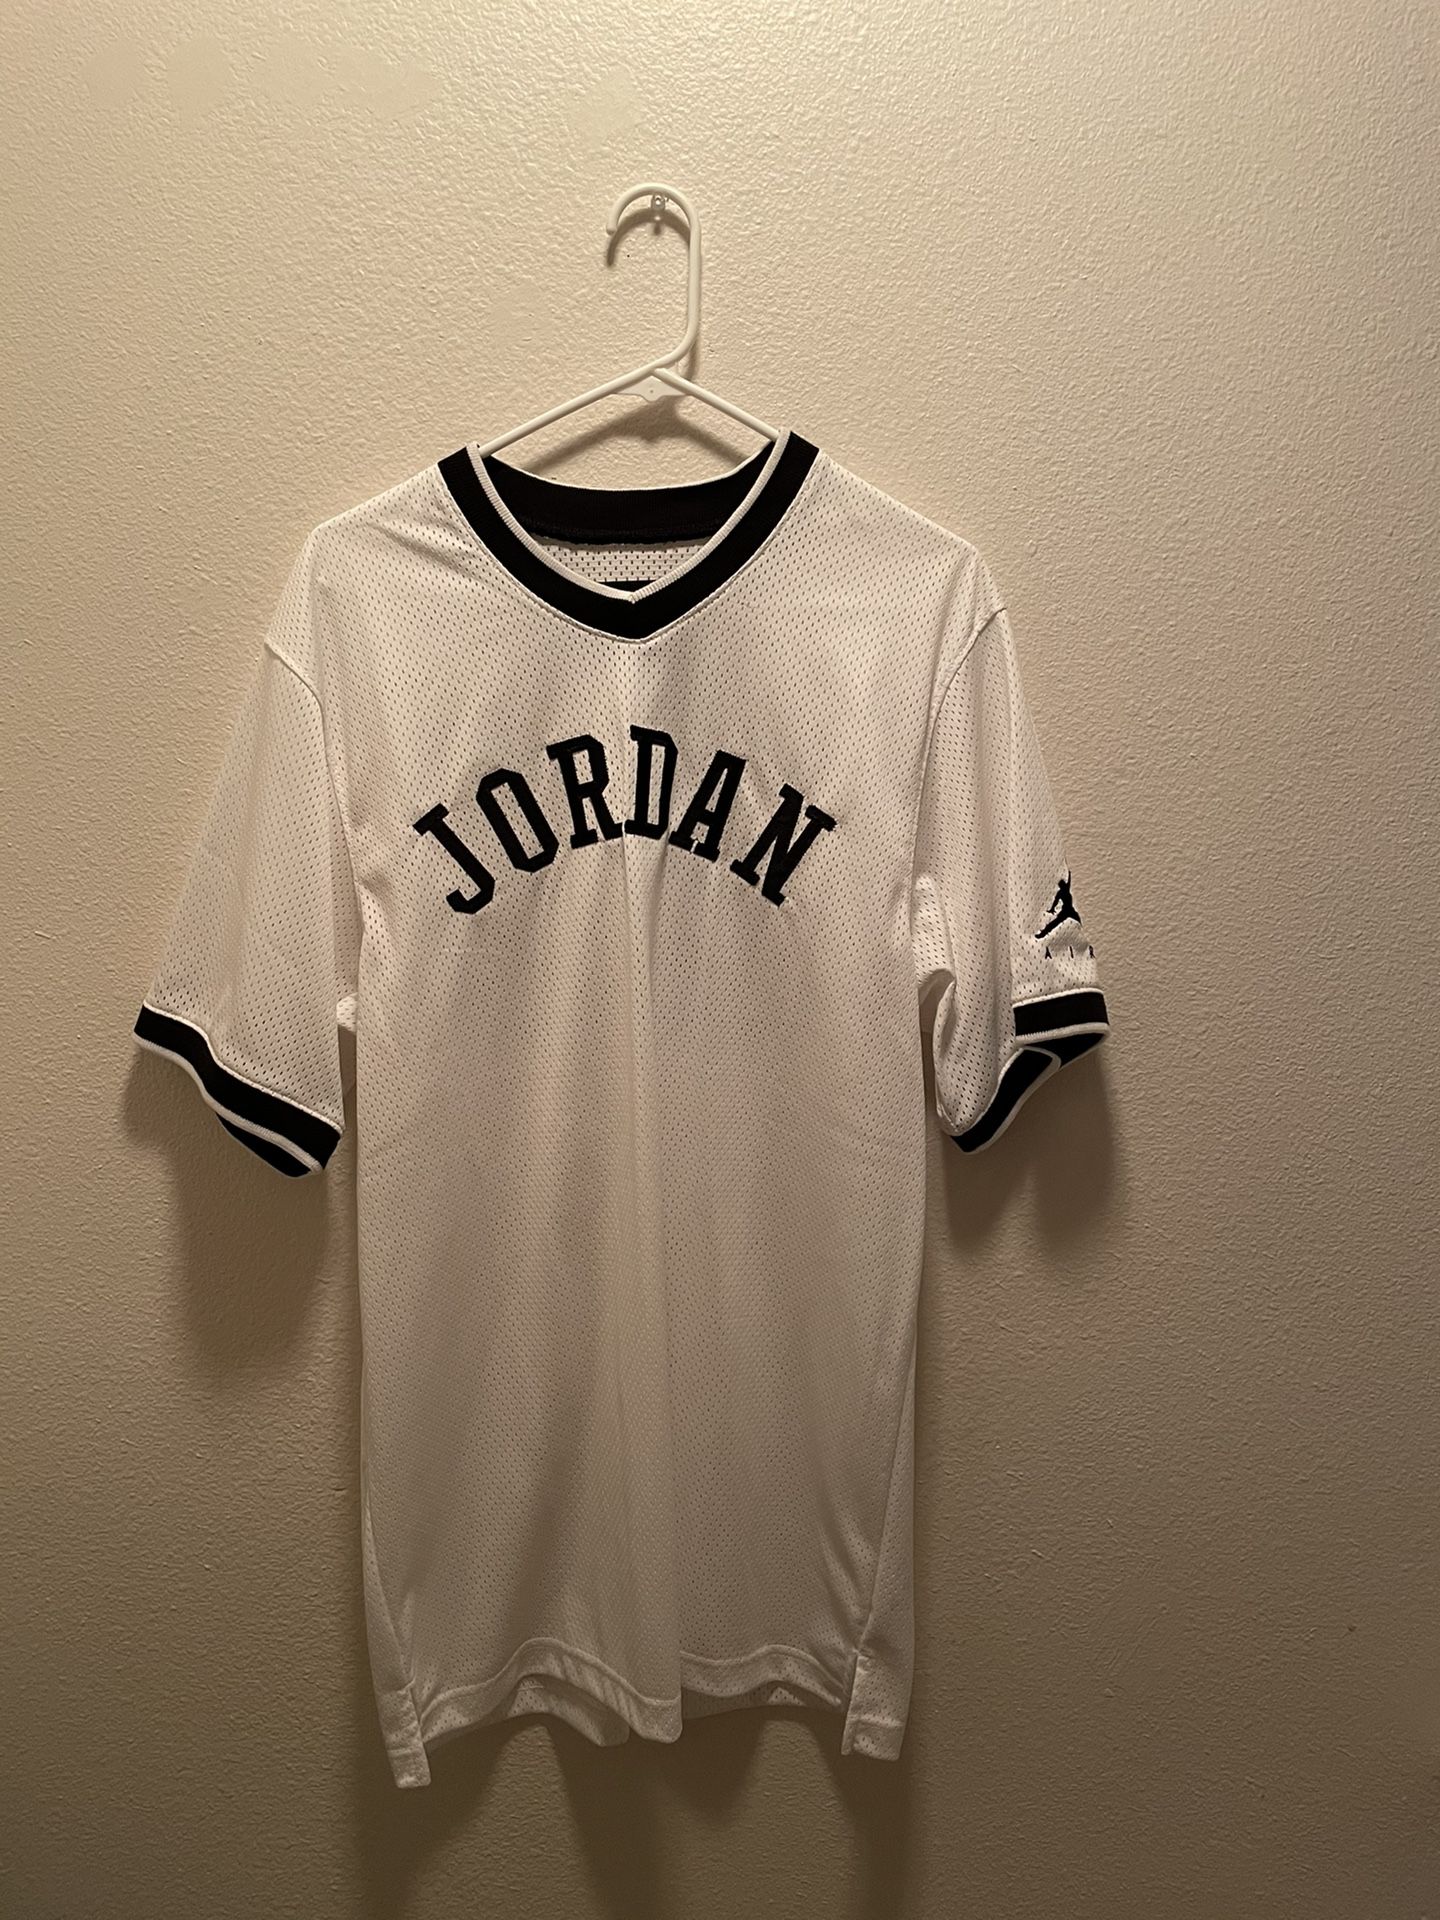 Michael Jordan reversible home away jersey by Champion (size 40) for Sale  in Portland, OR - OfferUp